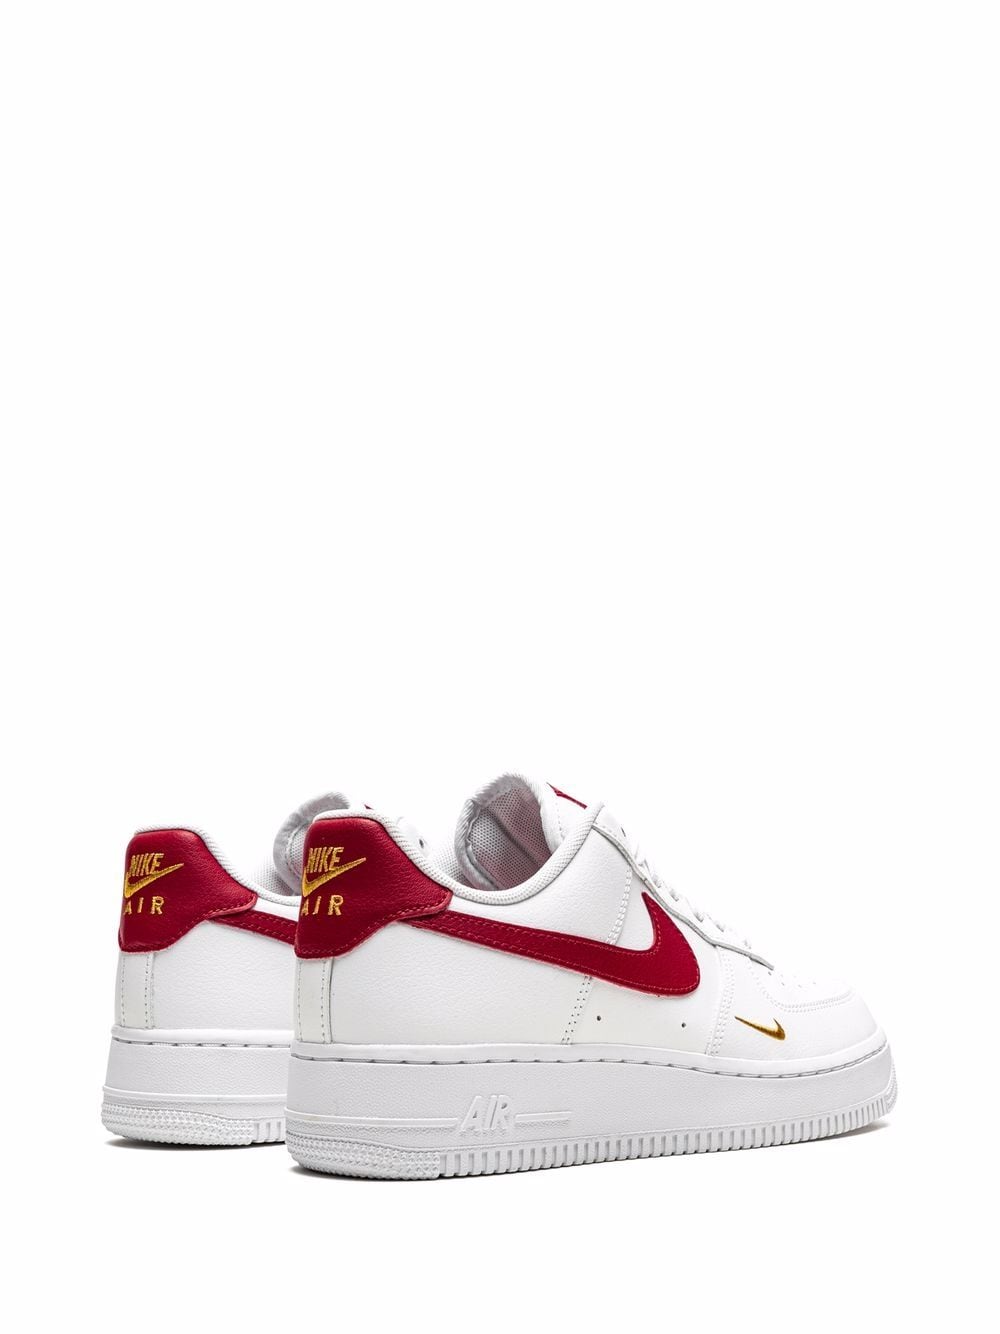 Nike Air Force 1 Gym Red for Sale, Authenticity Guaranteed